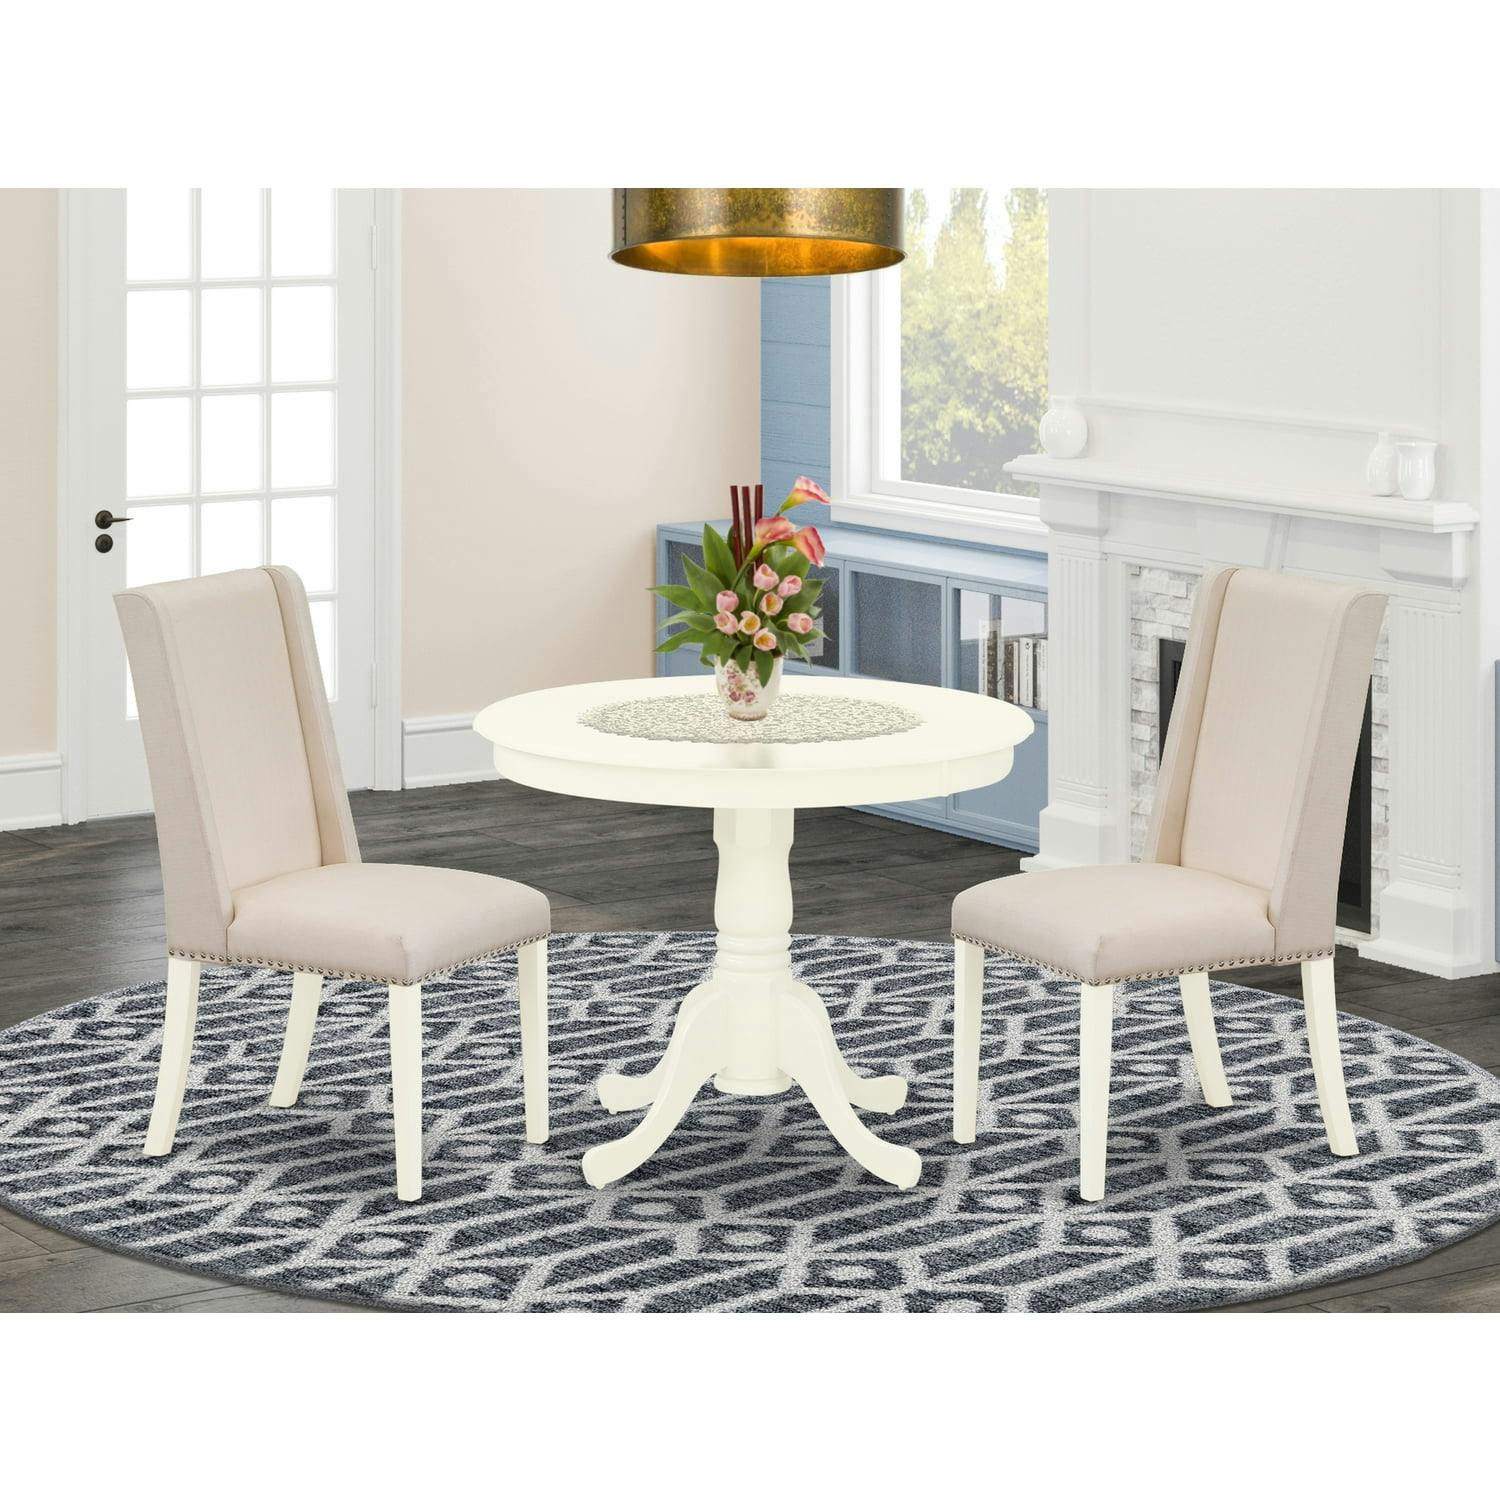 Linen White Glossy Finish 3-Piece Dining Set with Soft Fabric Chairs